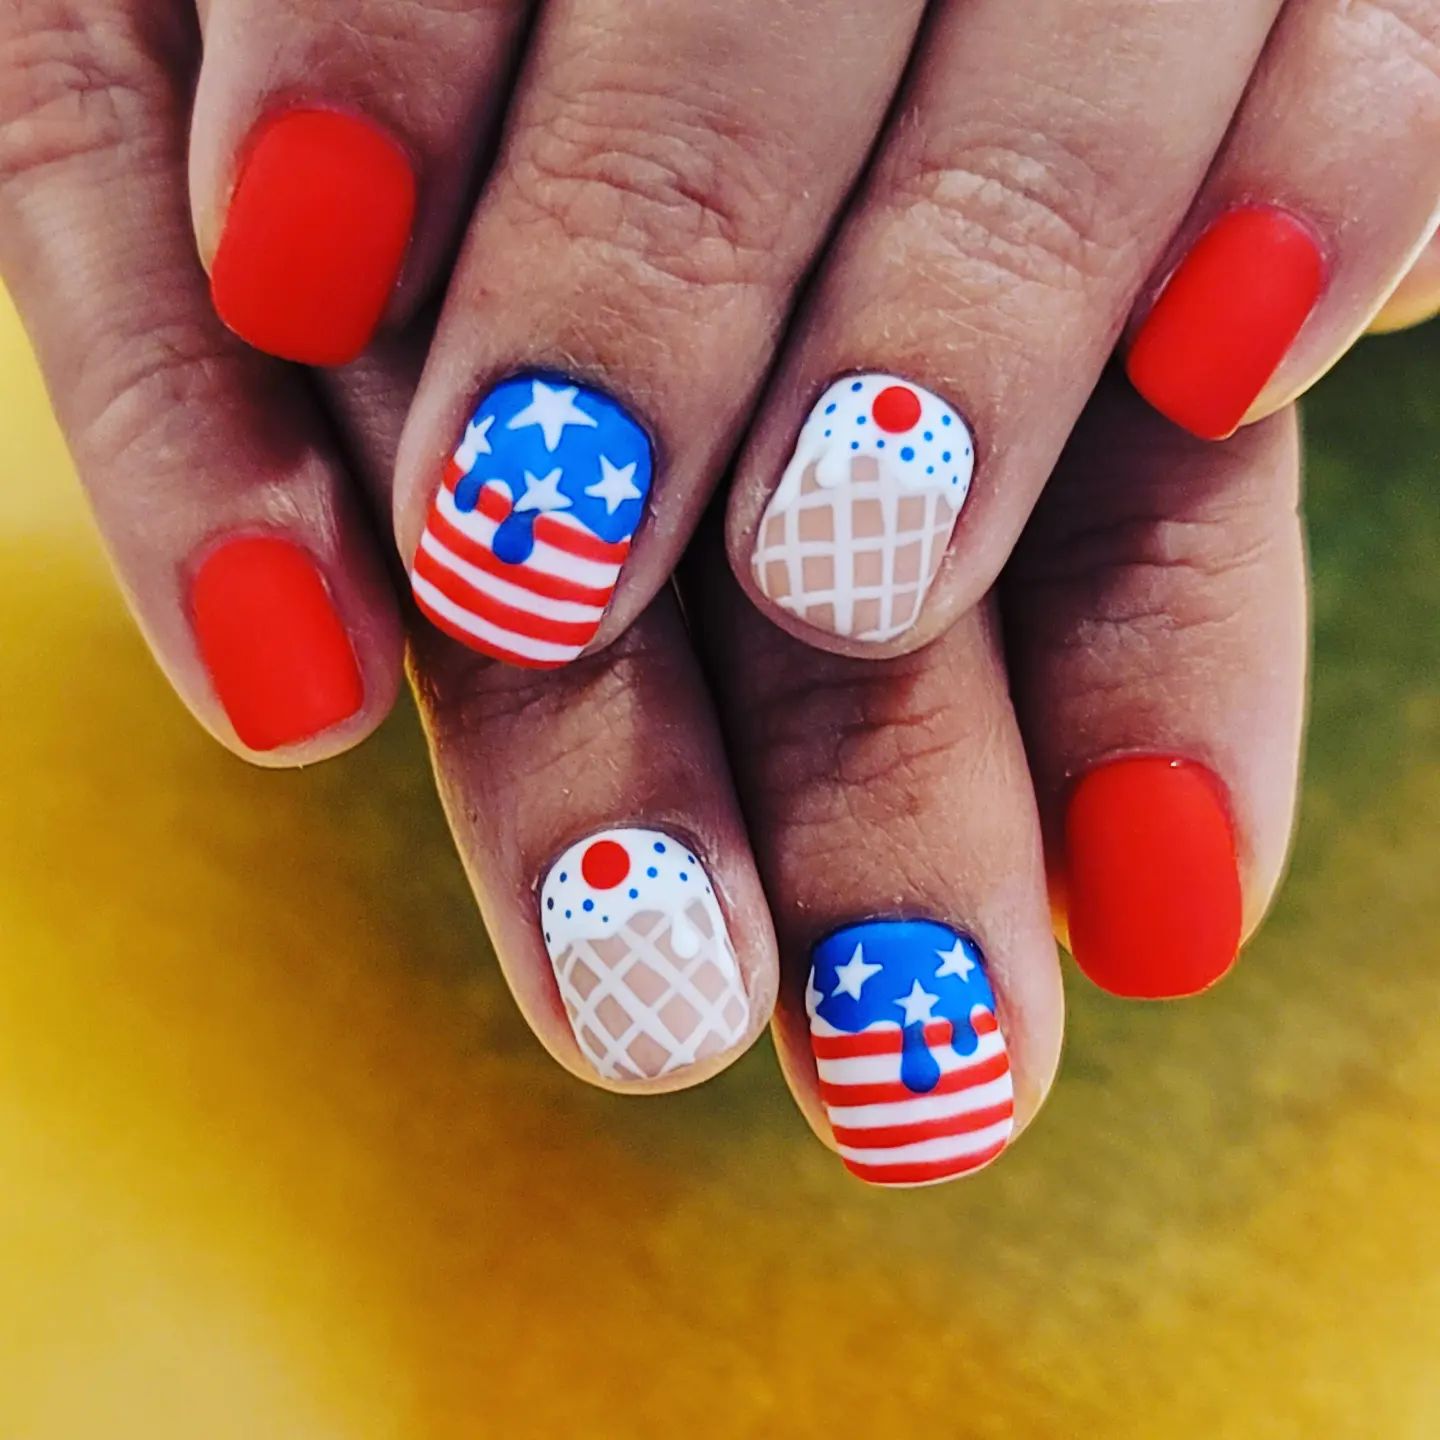  How many people have a melting ice cream and the American flad on their nails? Not many, so if you want to shine out in a crowd, go for it.